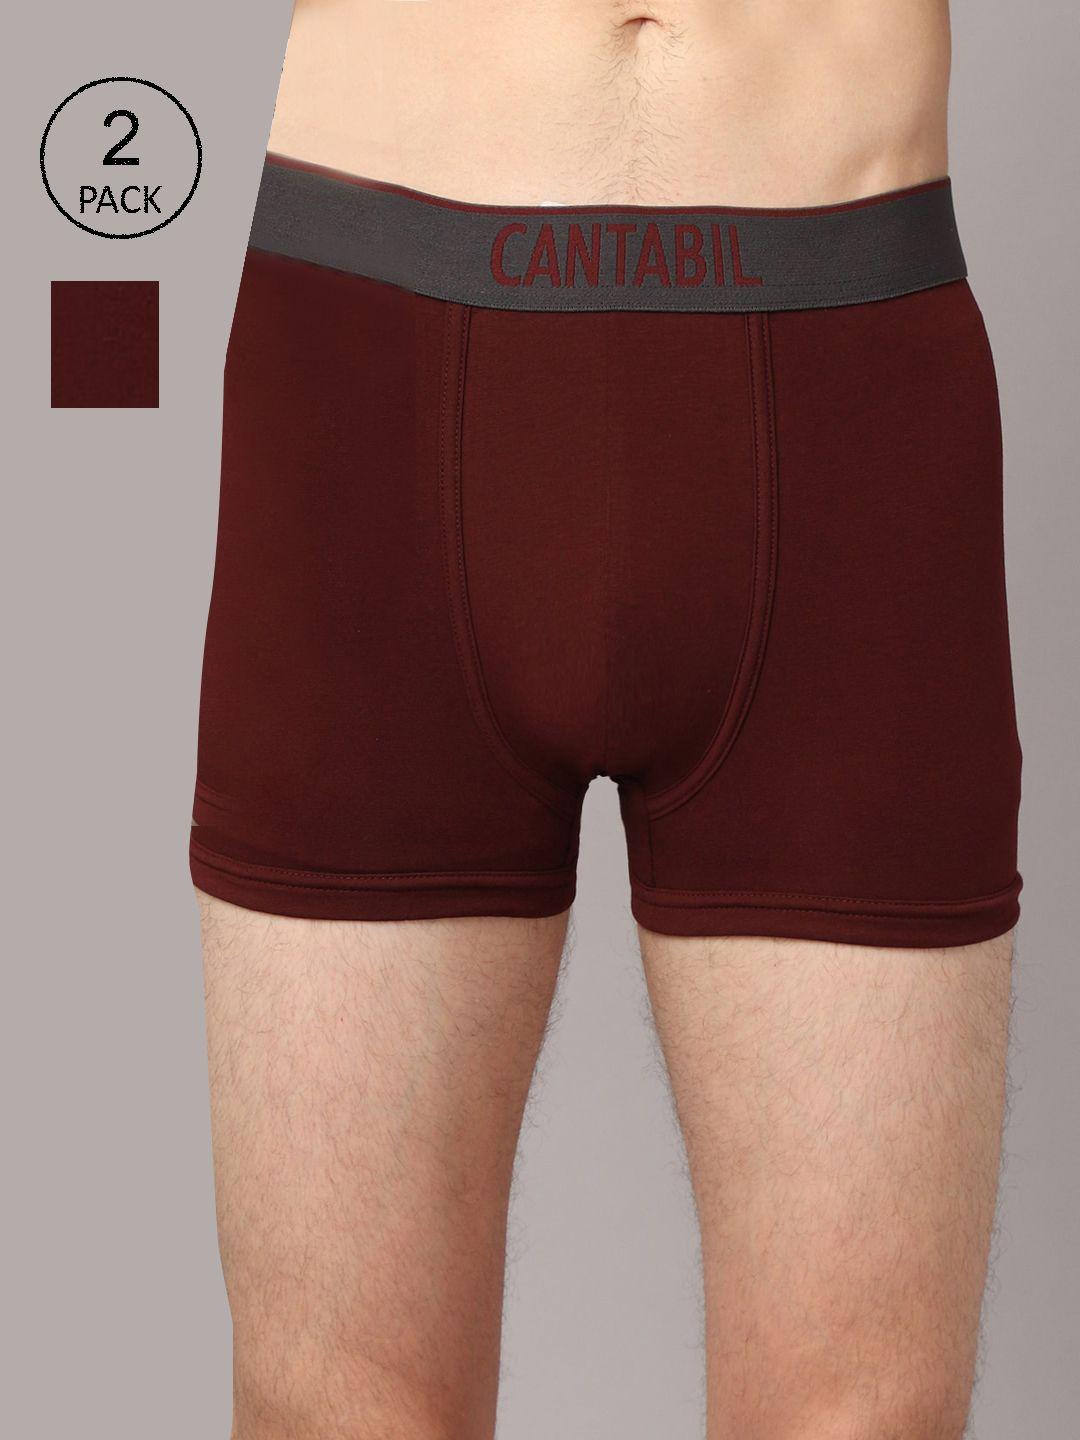 cantabil men pack of 2 maroon solid basic briefs